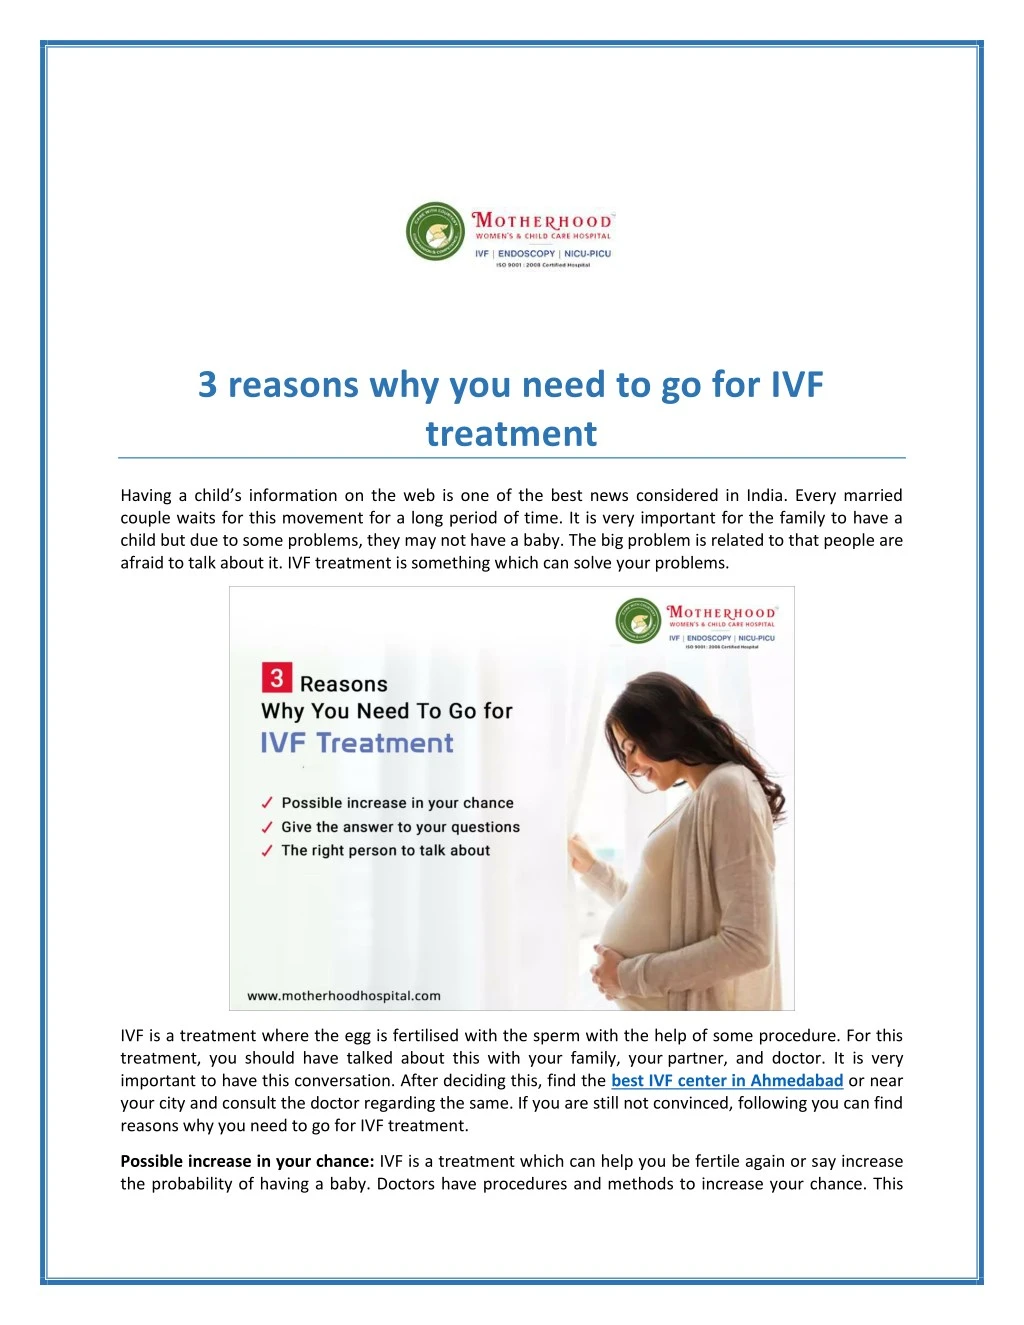 3 reasons why you need to go for ivf treatment